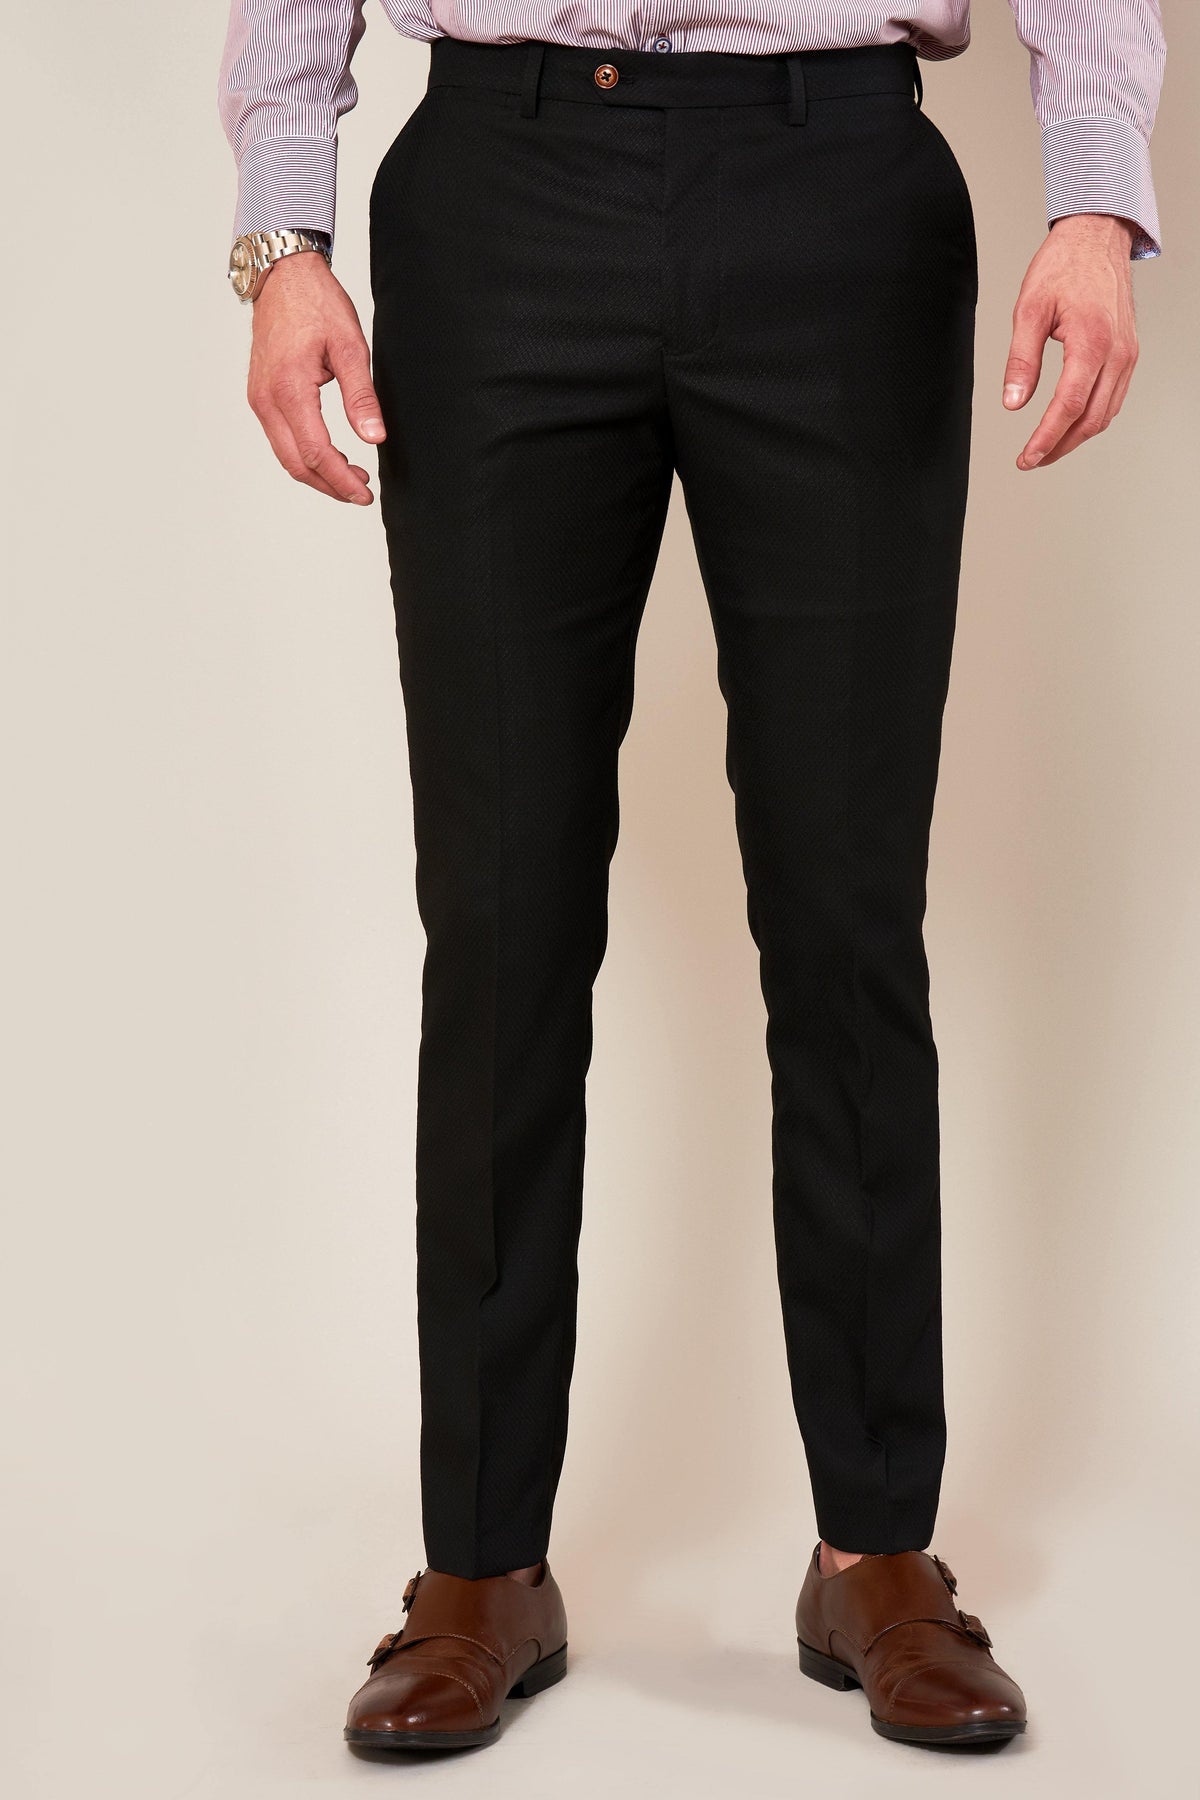 Shop Cool black cargo pants mens online at geat price